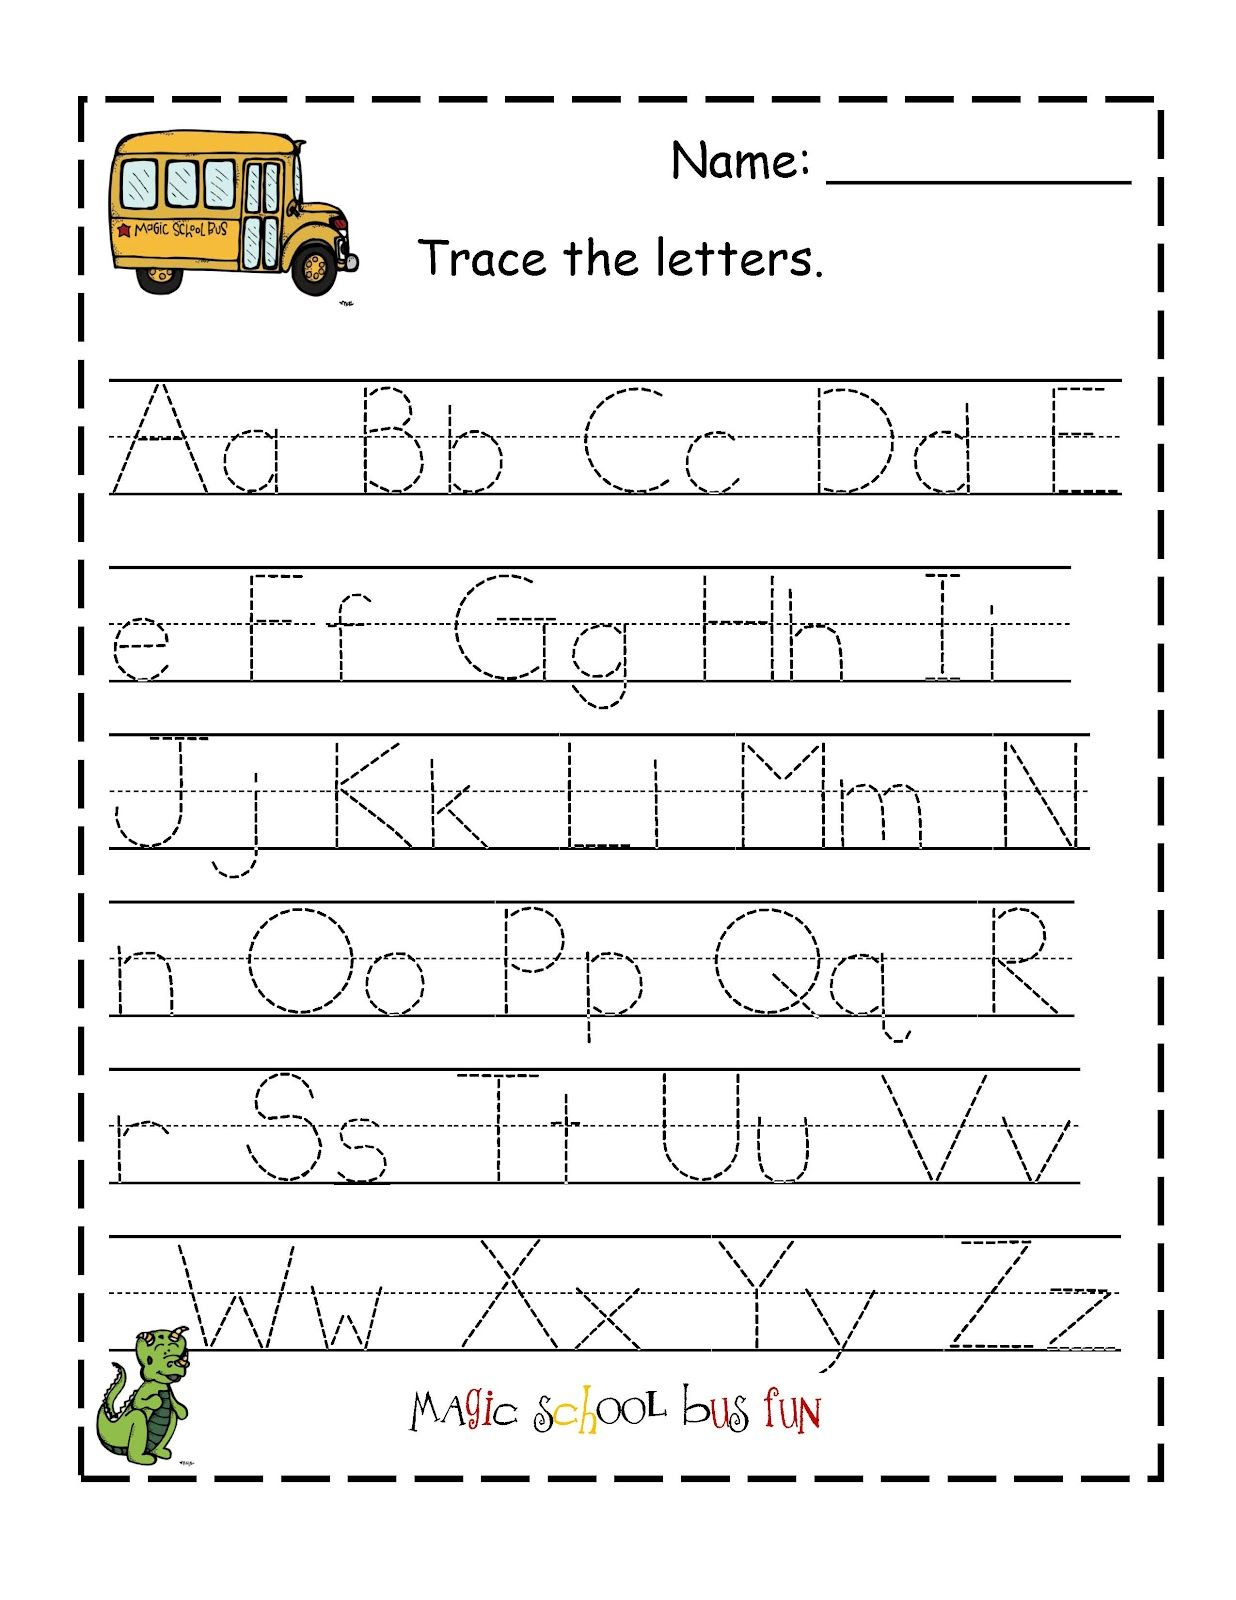 58 Staggering Alphabet Tracing Worksheets Image Inspirations throughout Letter S Tracing Worksheets For Preschool